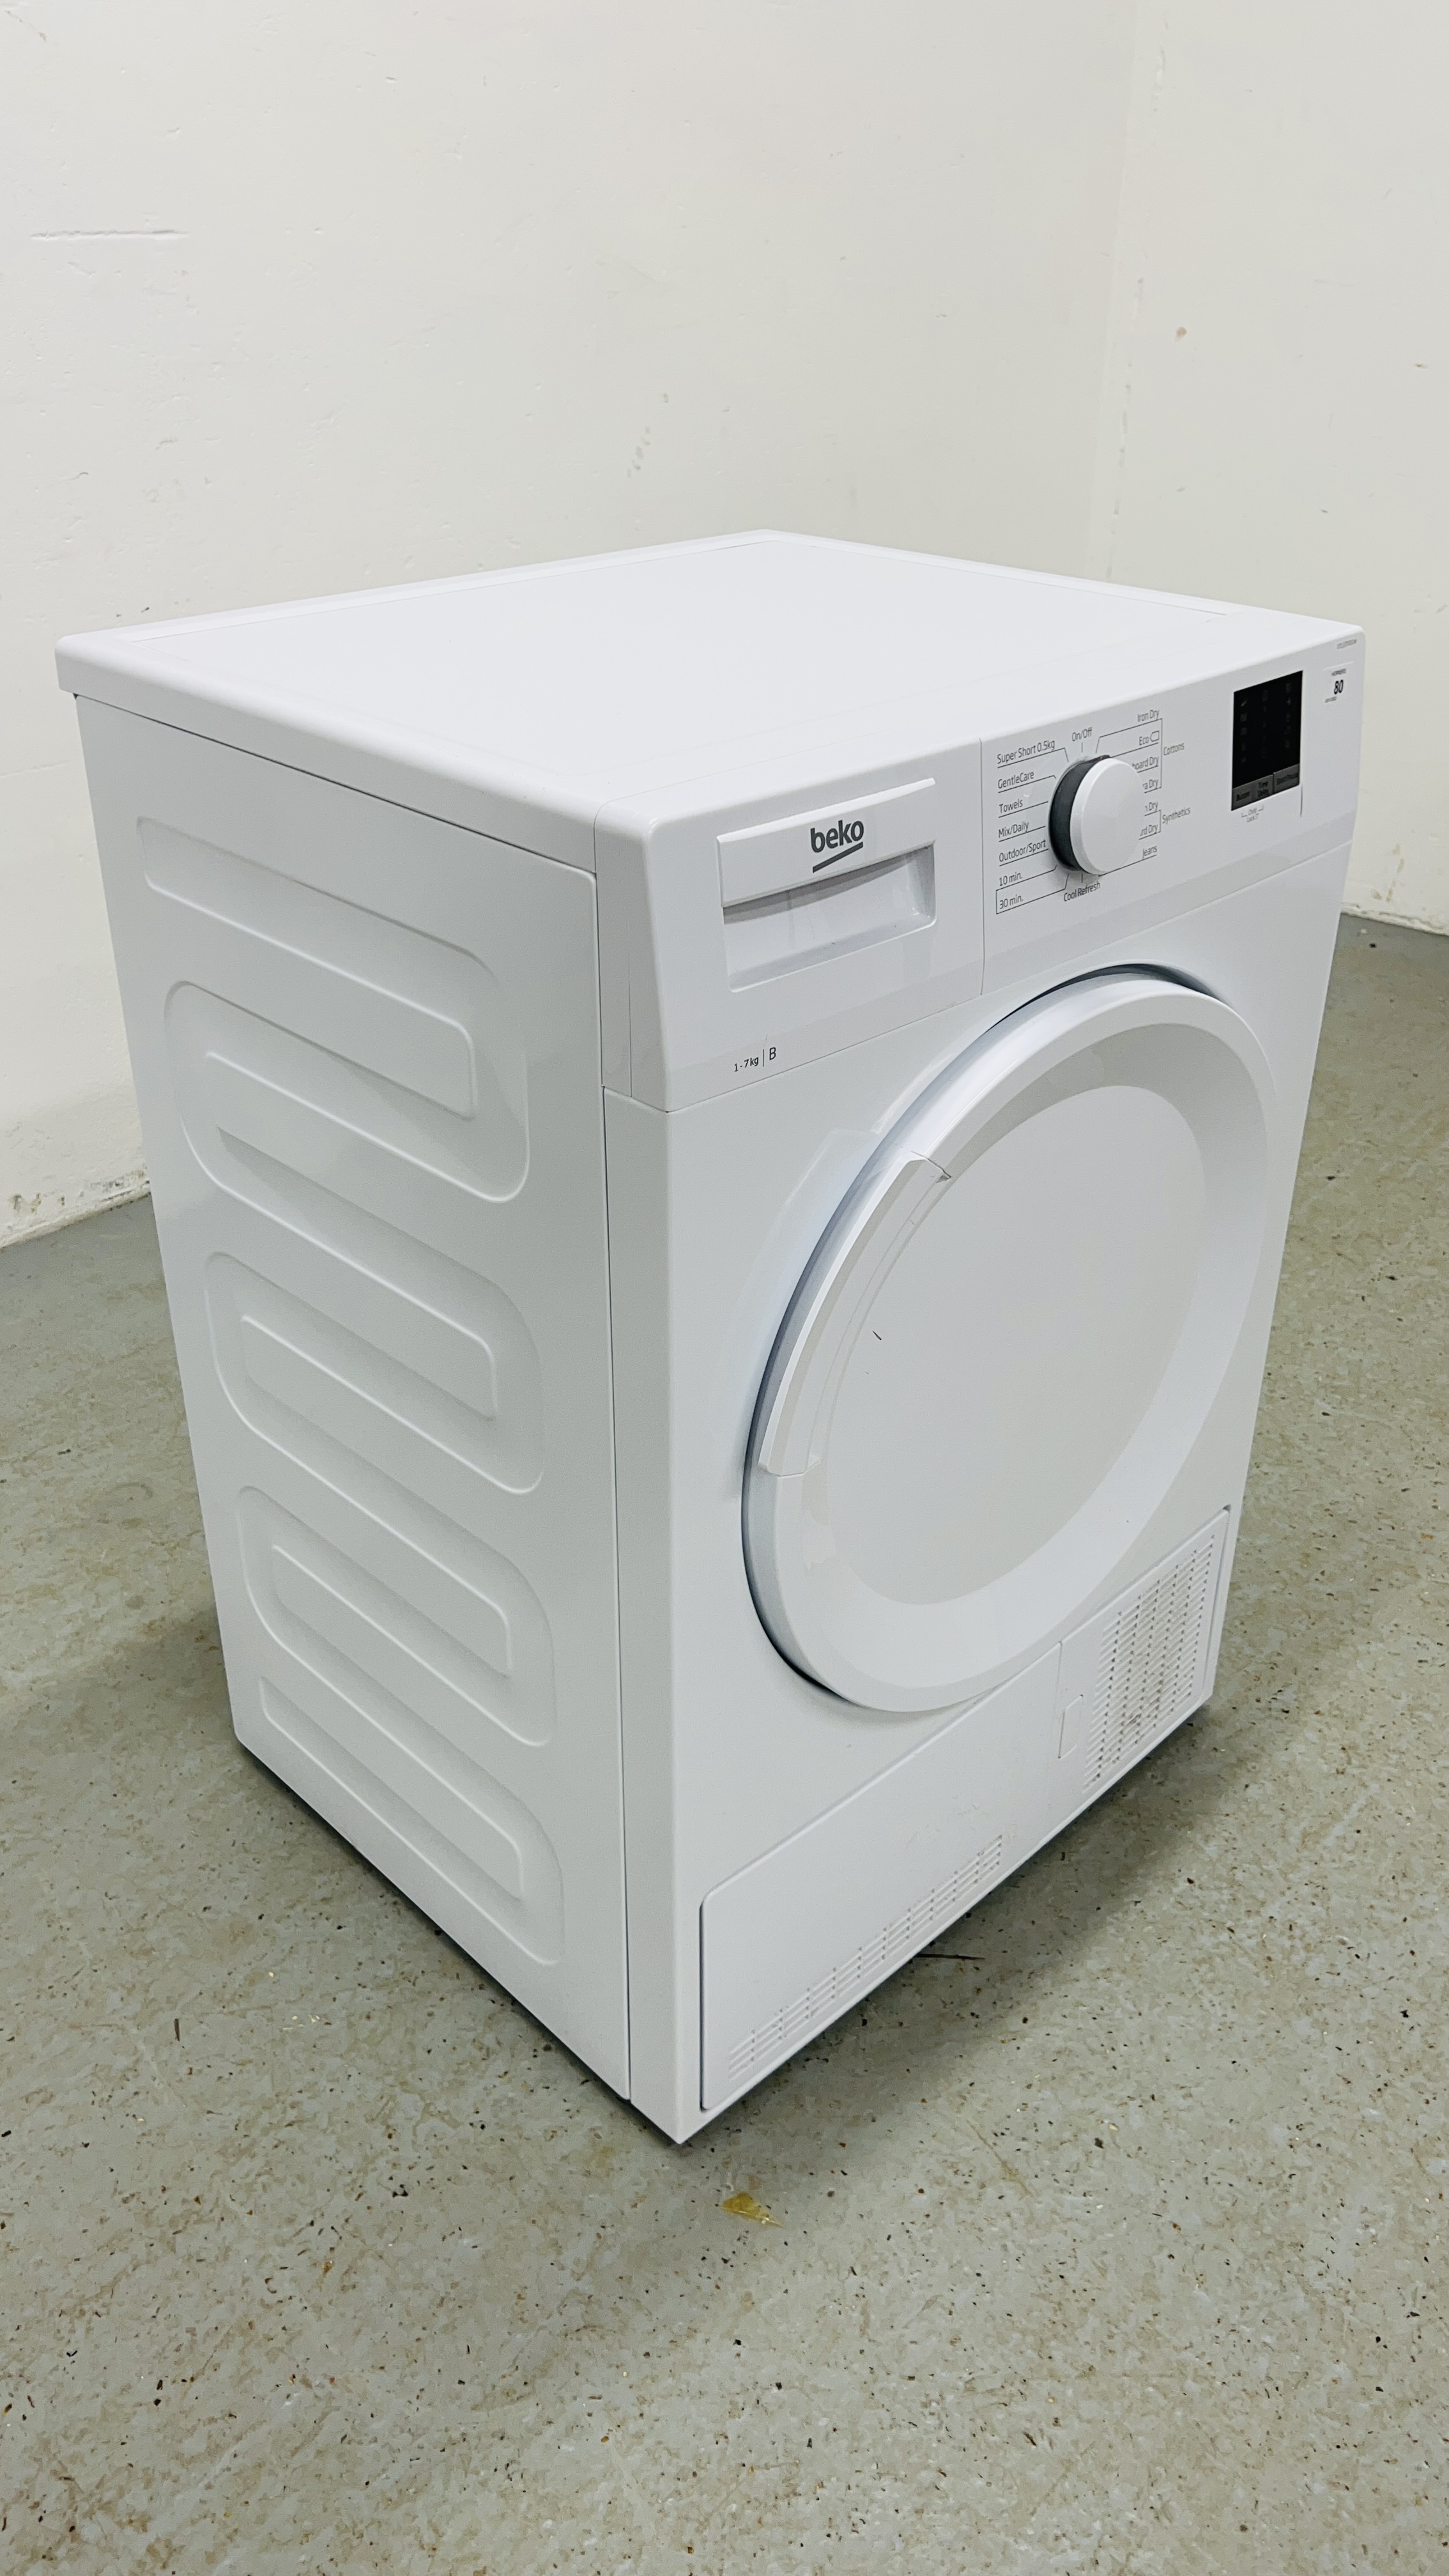 A BEKO 7KG CONDENSER TUMBLE DRYER - SOLD AS SEEN - Image 5 of 7